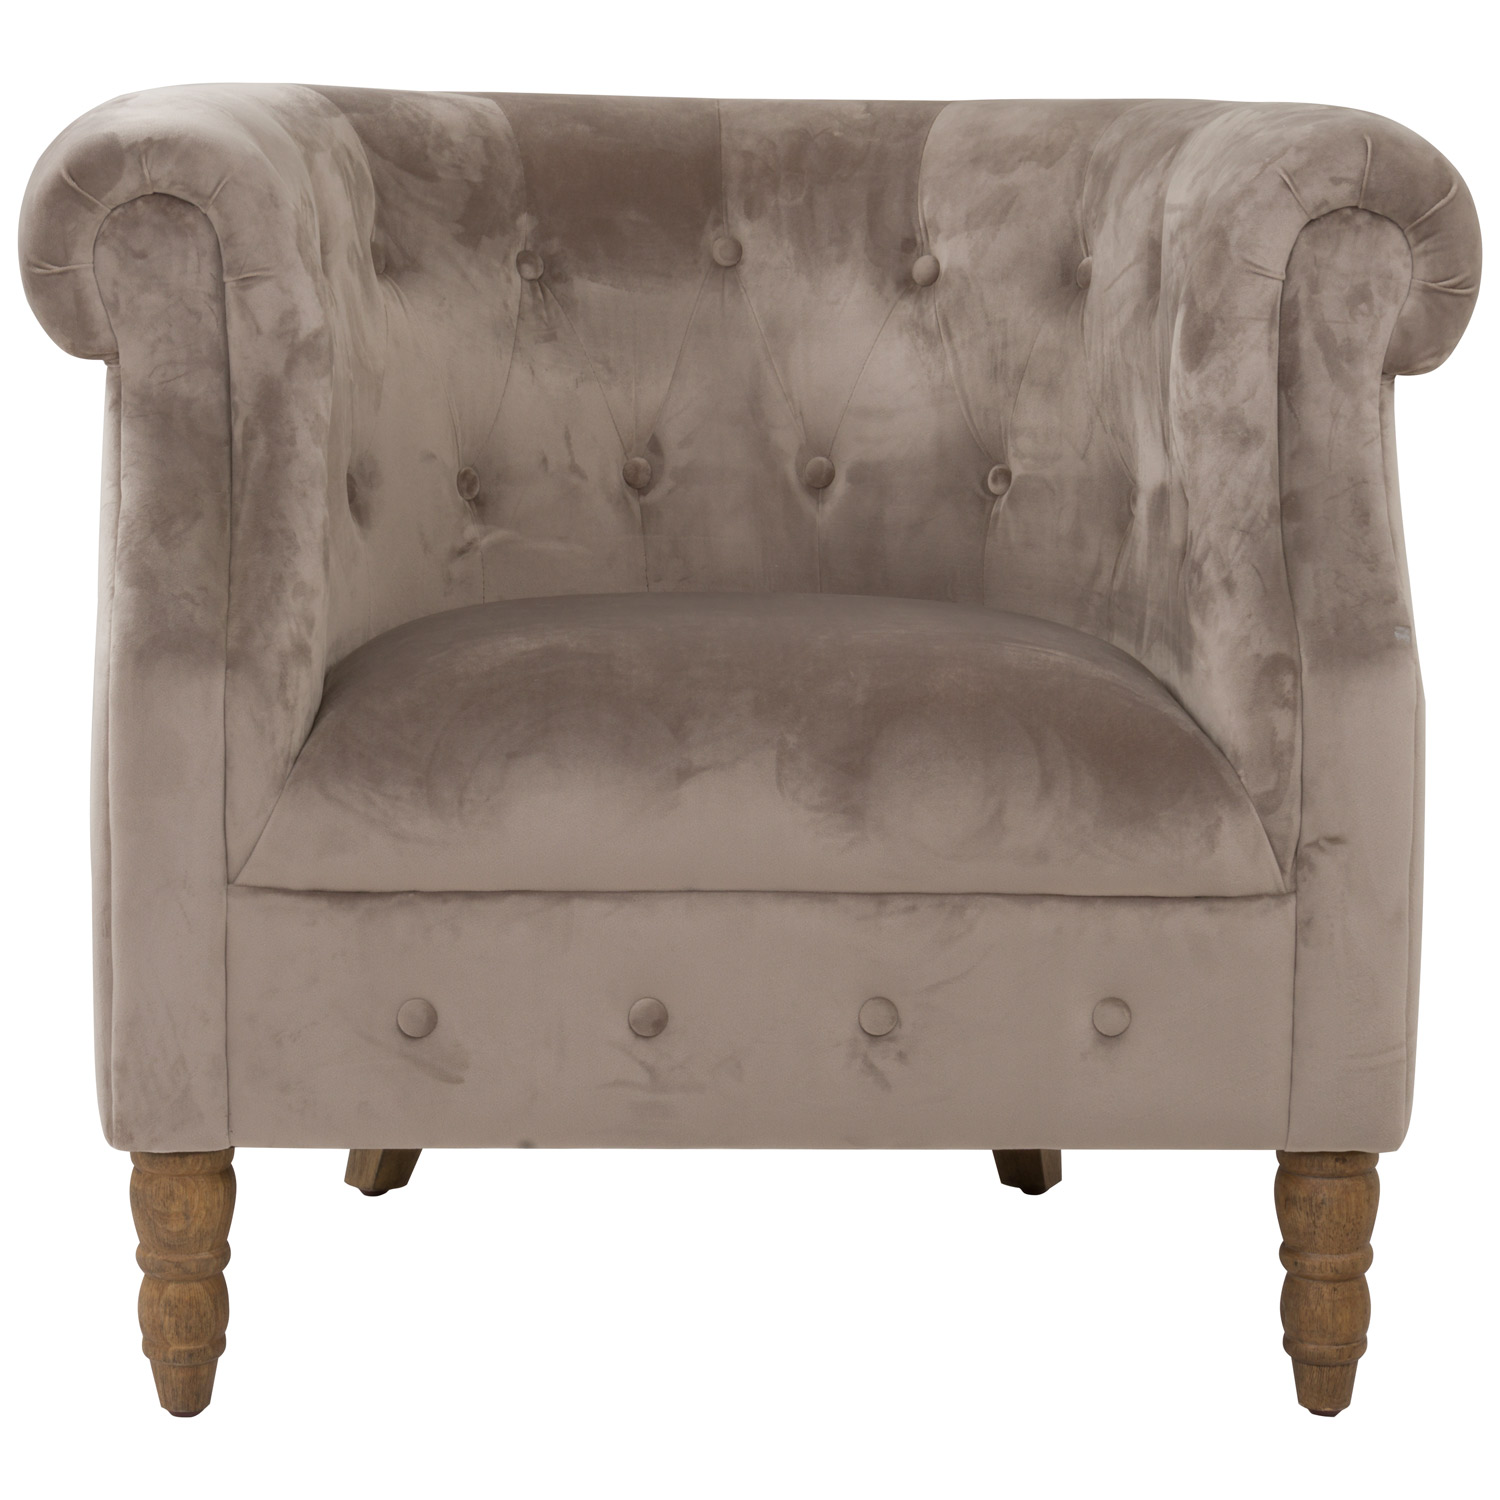 Chelsea Chesterfield Tub Chair - Image 2